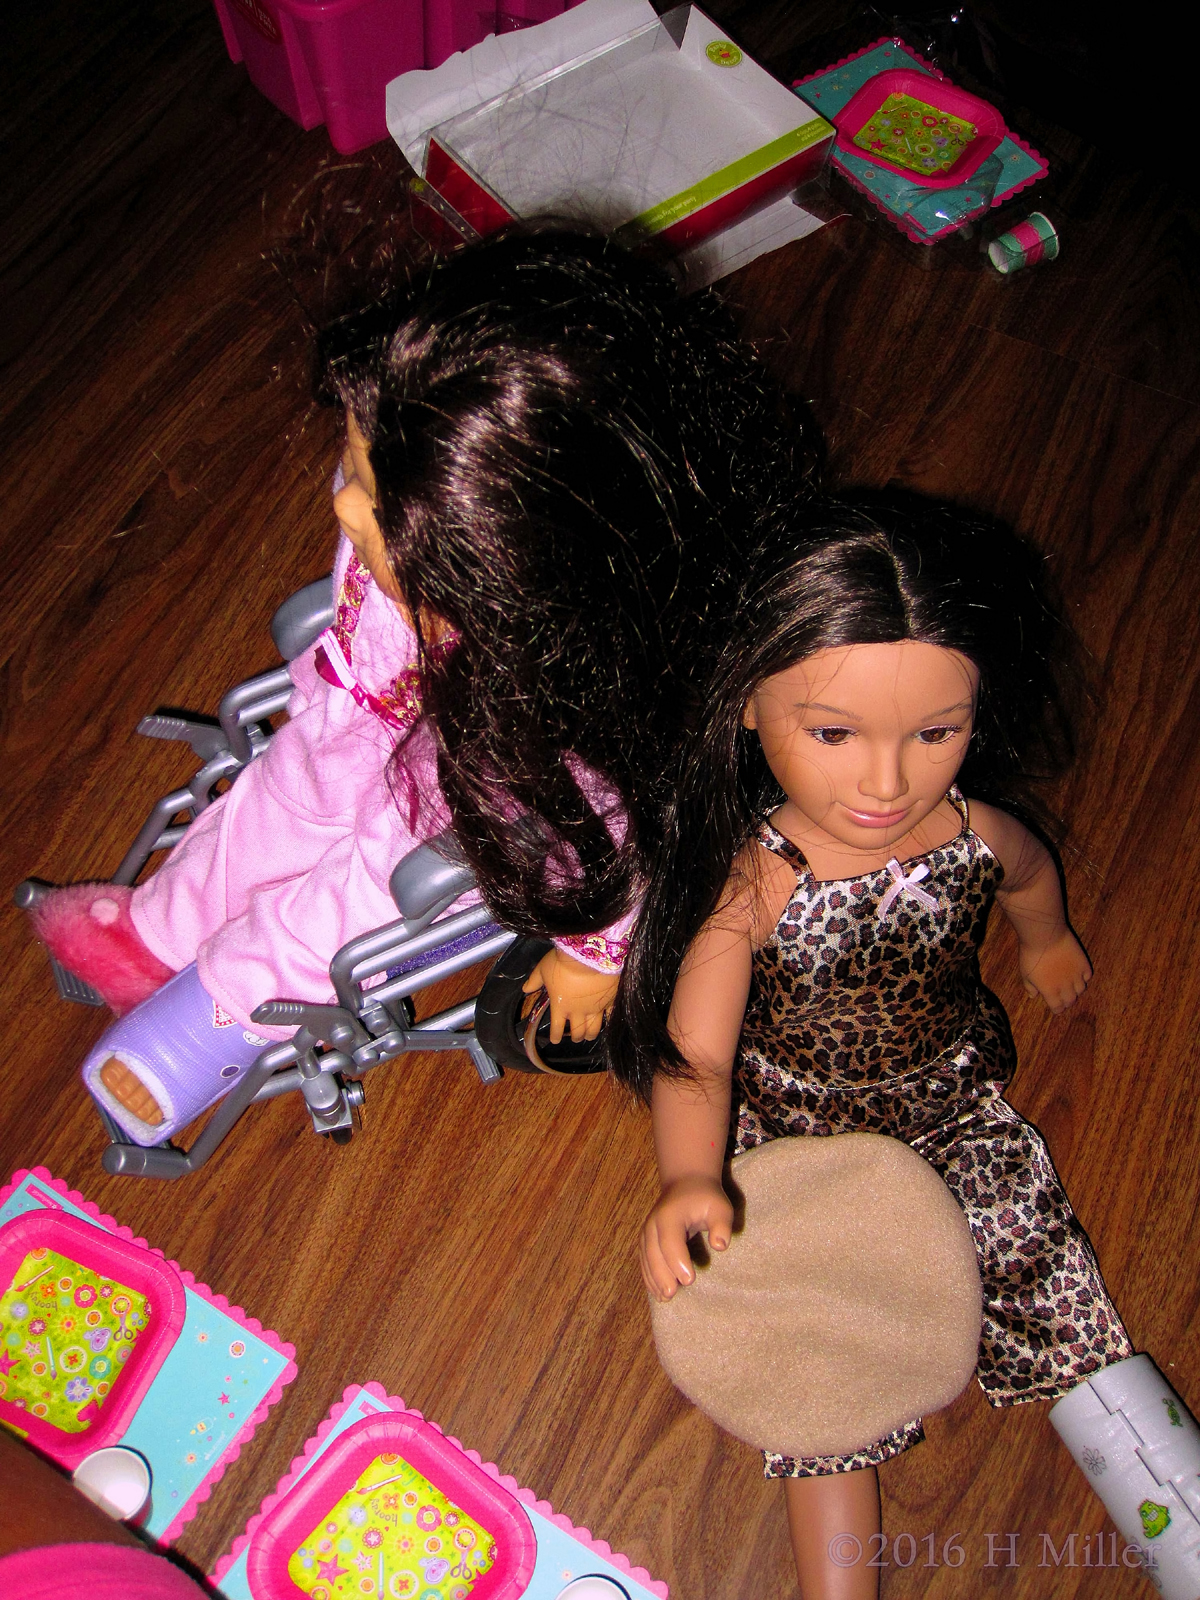 Injuries Won't Stop These Dolls From Joining The Party